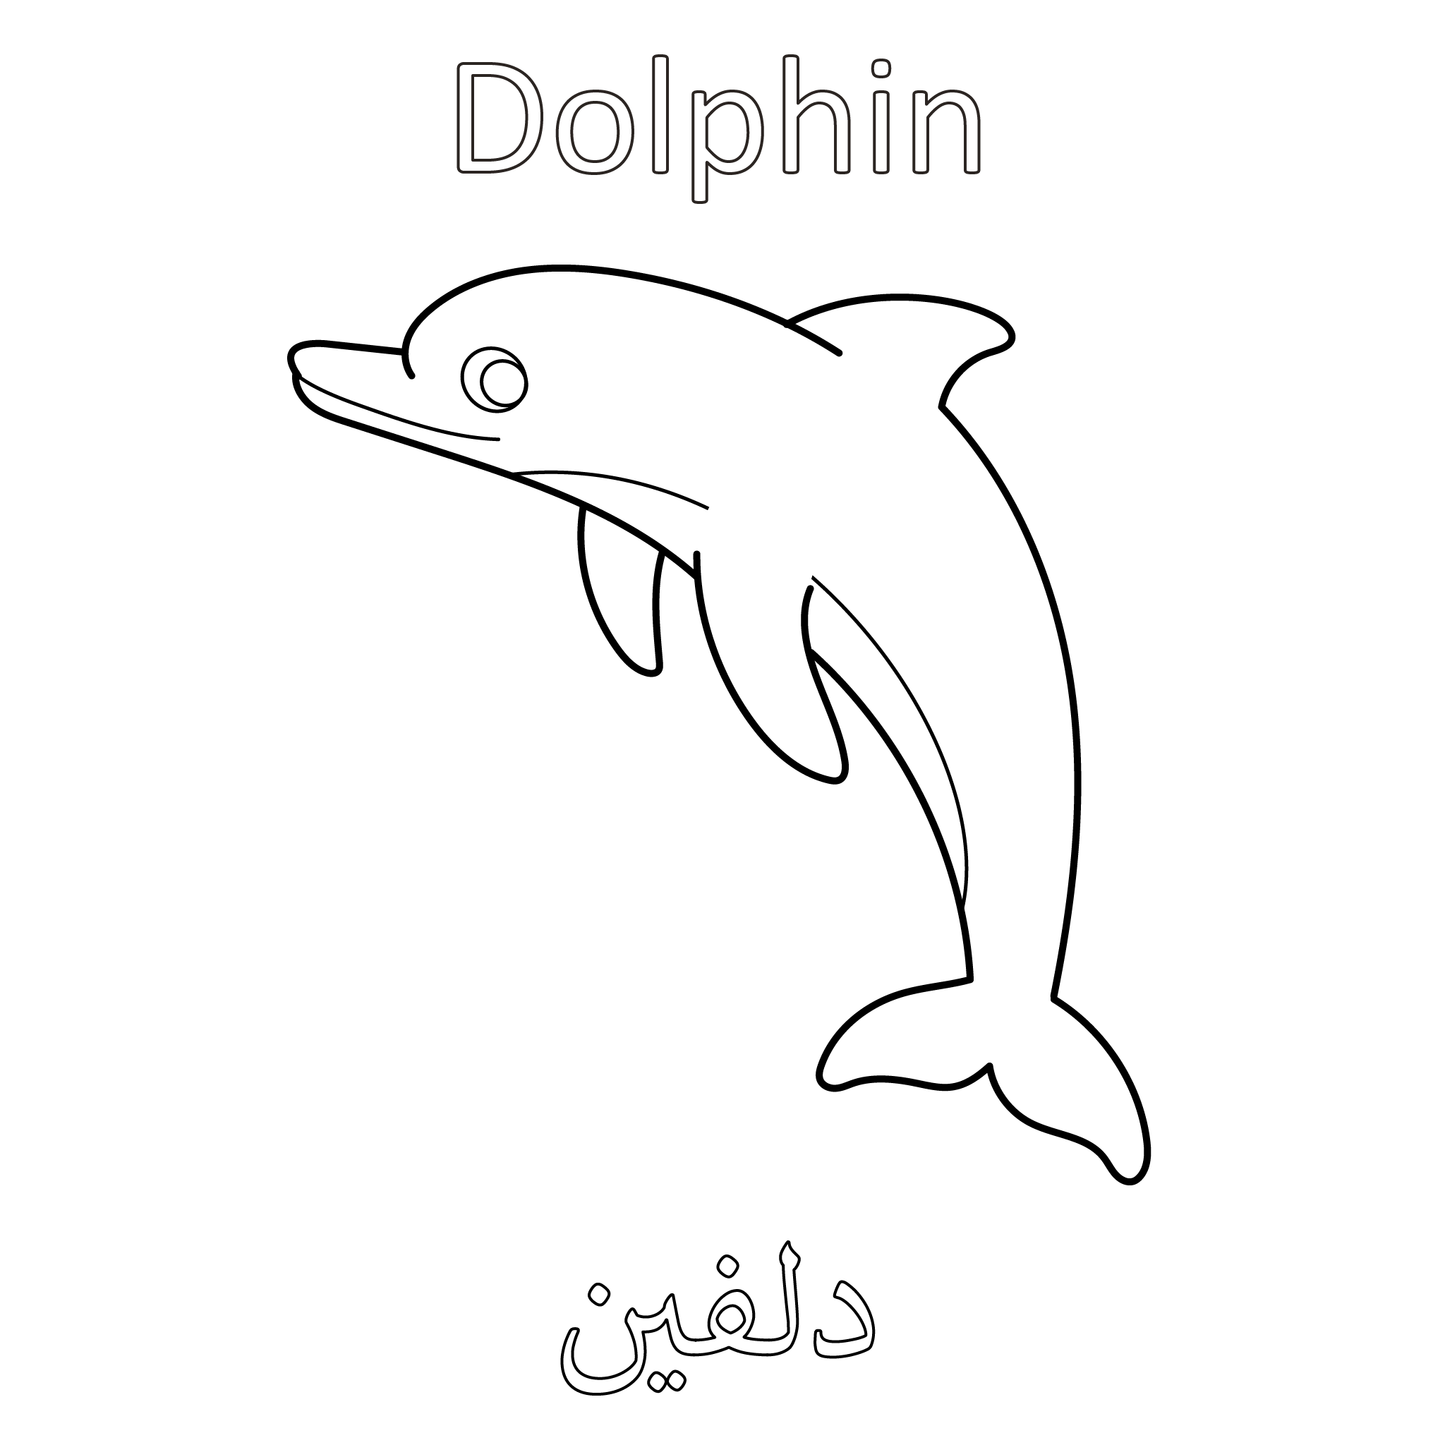 My First Bilingual English Arabic Picture Dictionary Coloring Book 35 Sea Animals: Simple, Easy-to-Color Large Drawings With Animals Names, Cute Designs With Thick Black Outlines - Perfect for Toddlers Ages 1+